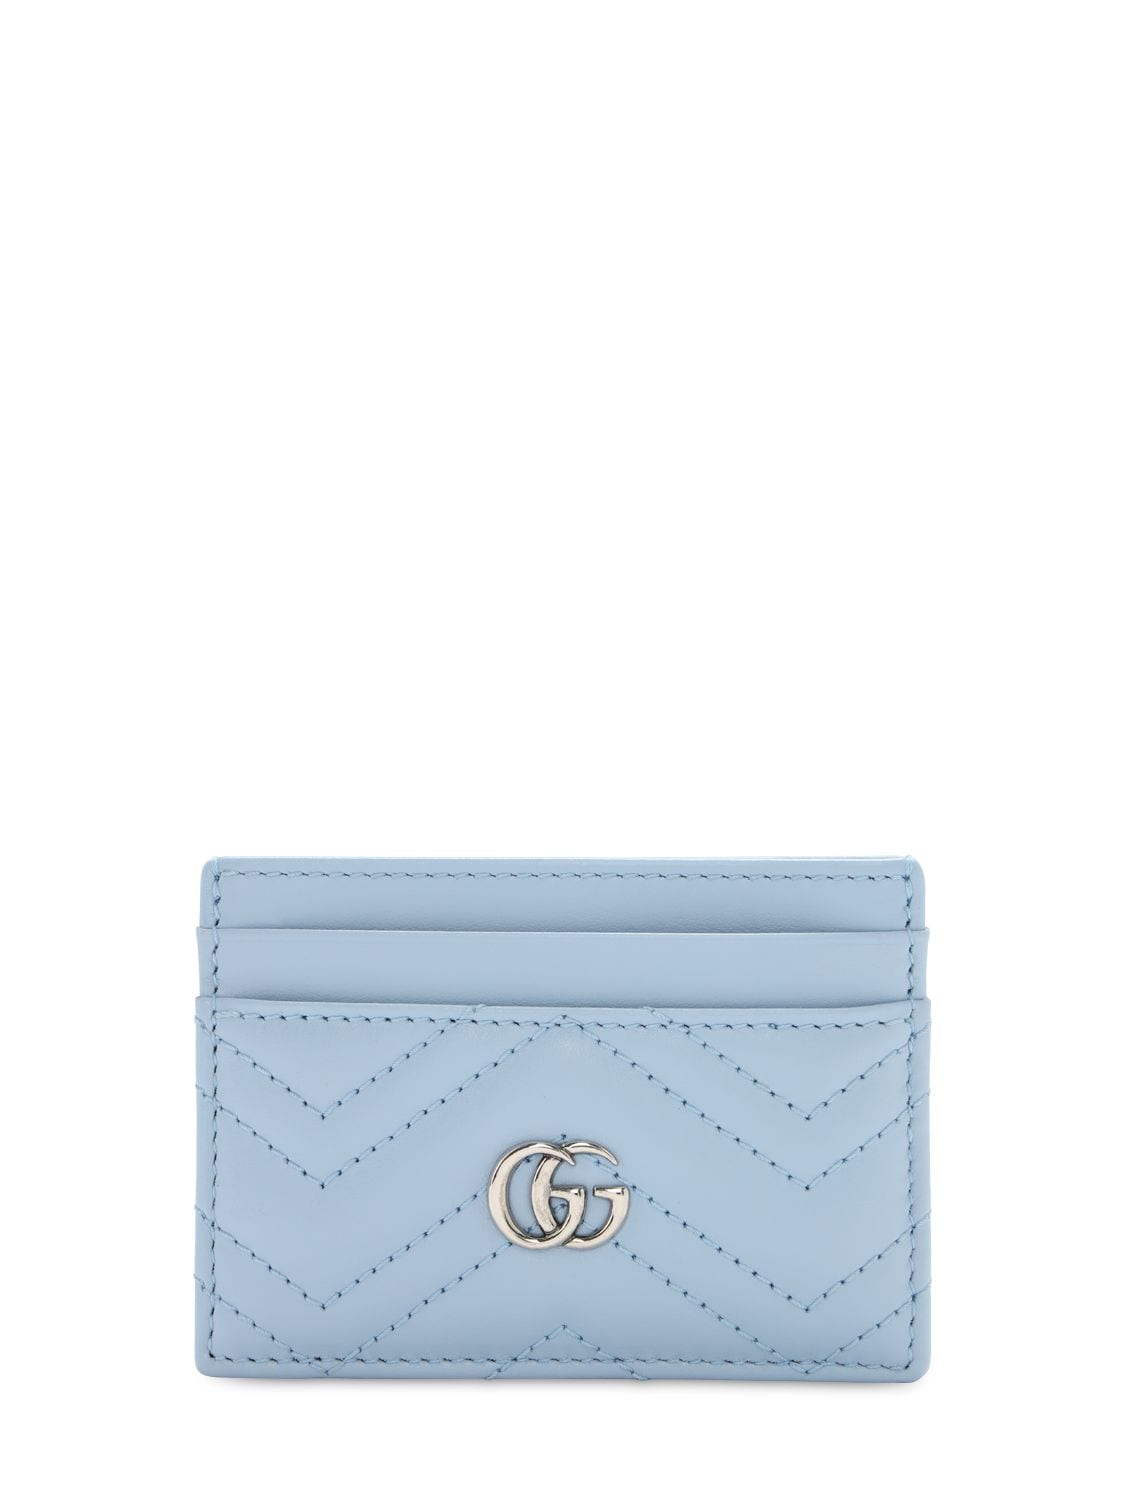 Gucci Gg Marmont Quilted Leather Card Holder In Light Blue